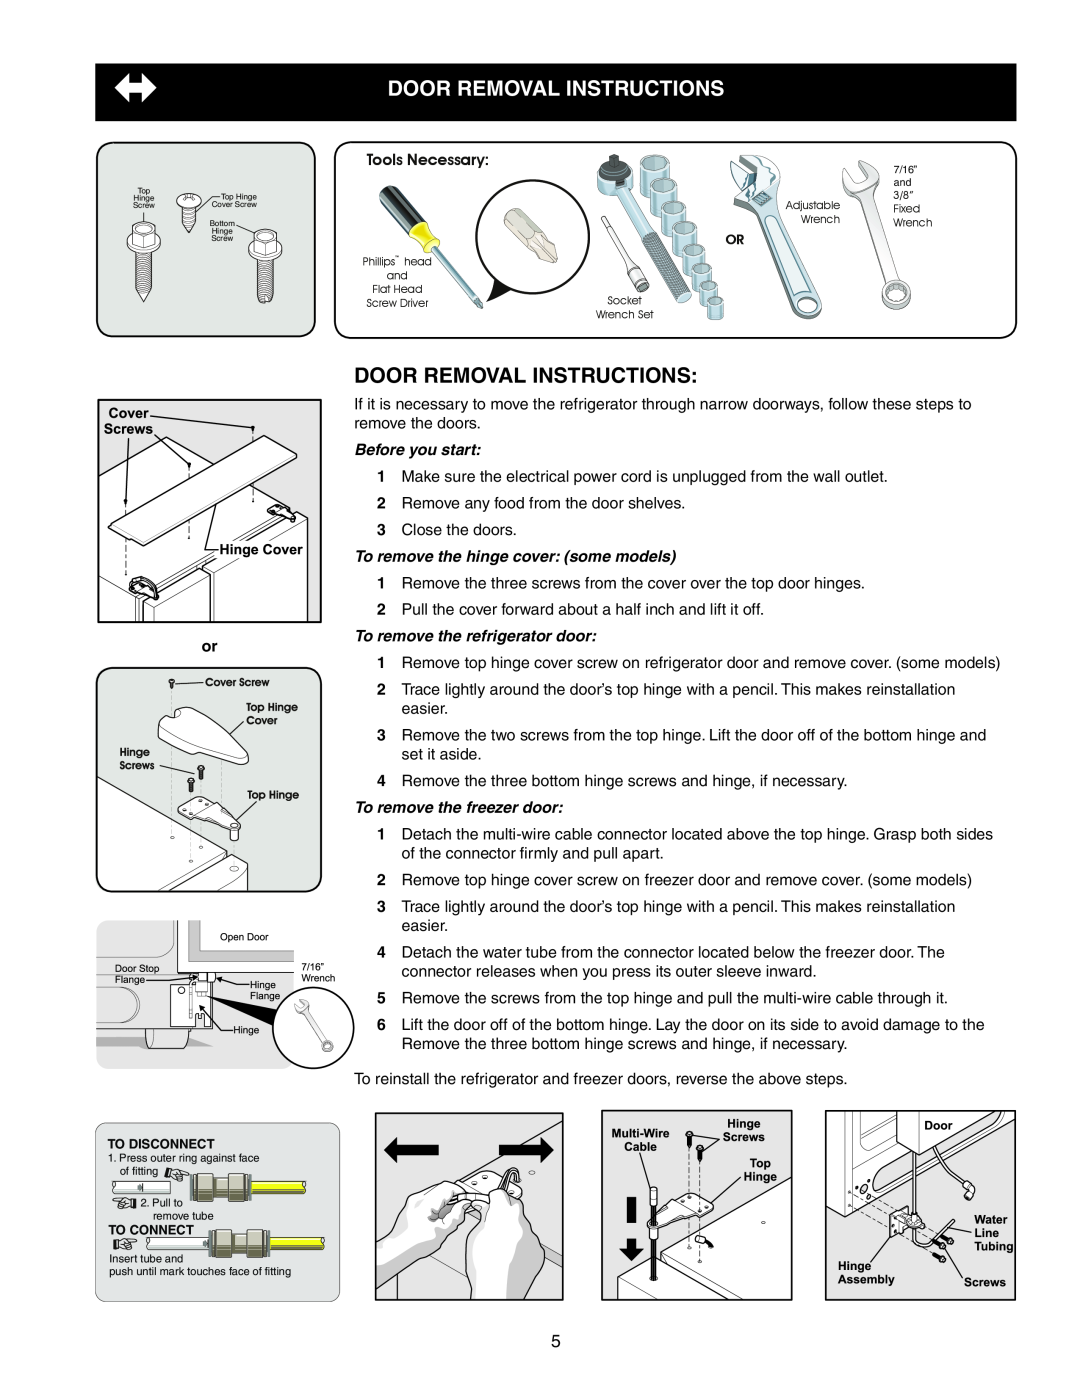 Frigidaire 241856001 Door Removal Instructions, door removal instructions, Tools Necessary, Before you start 